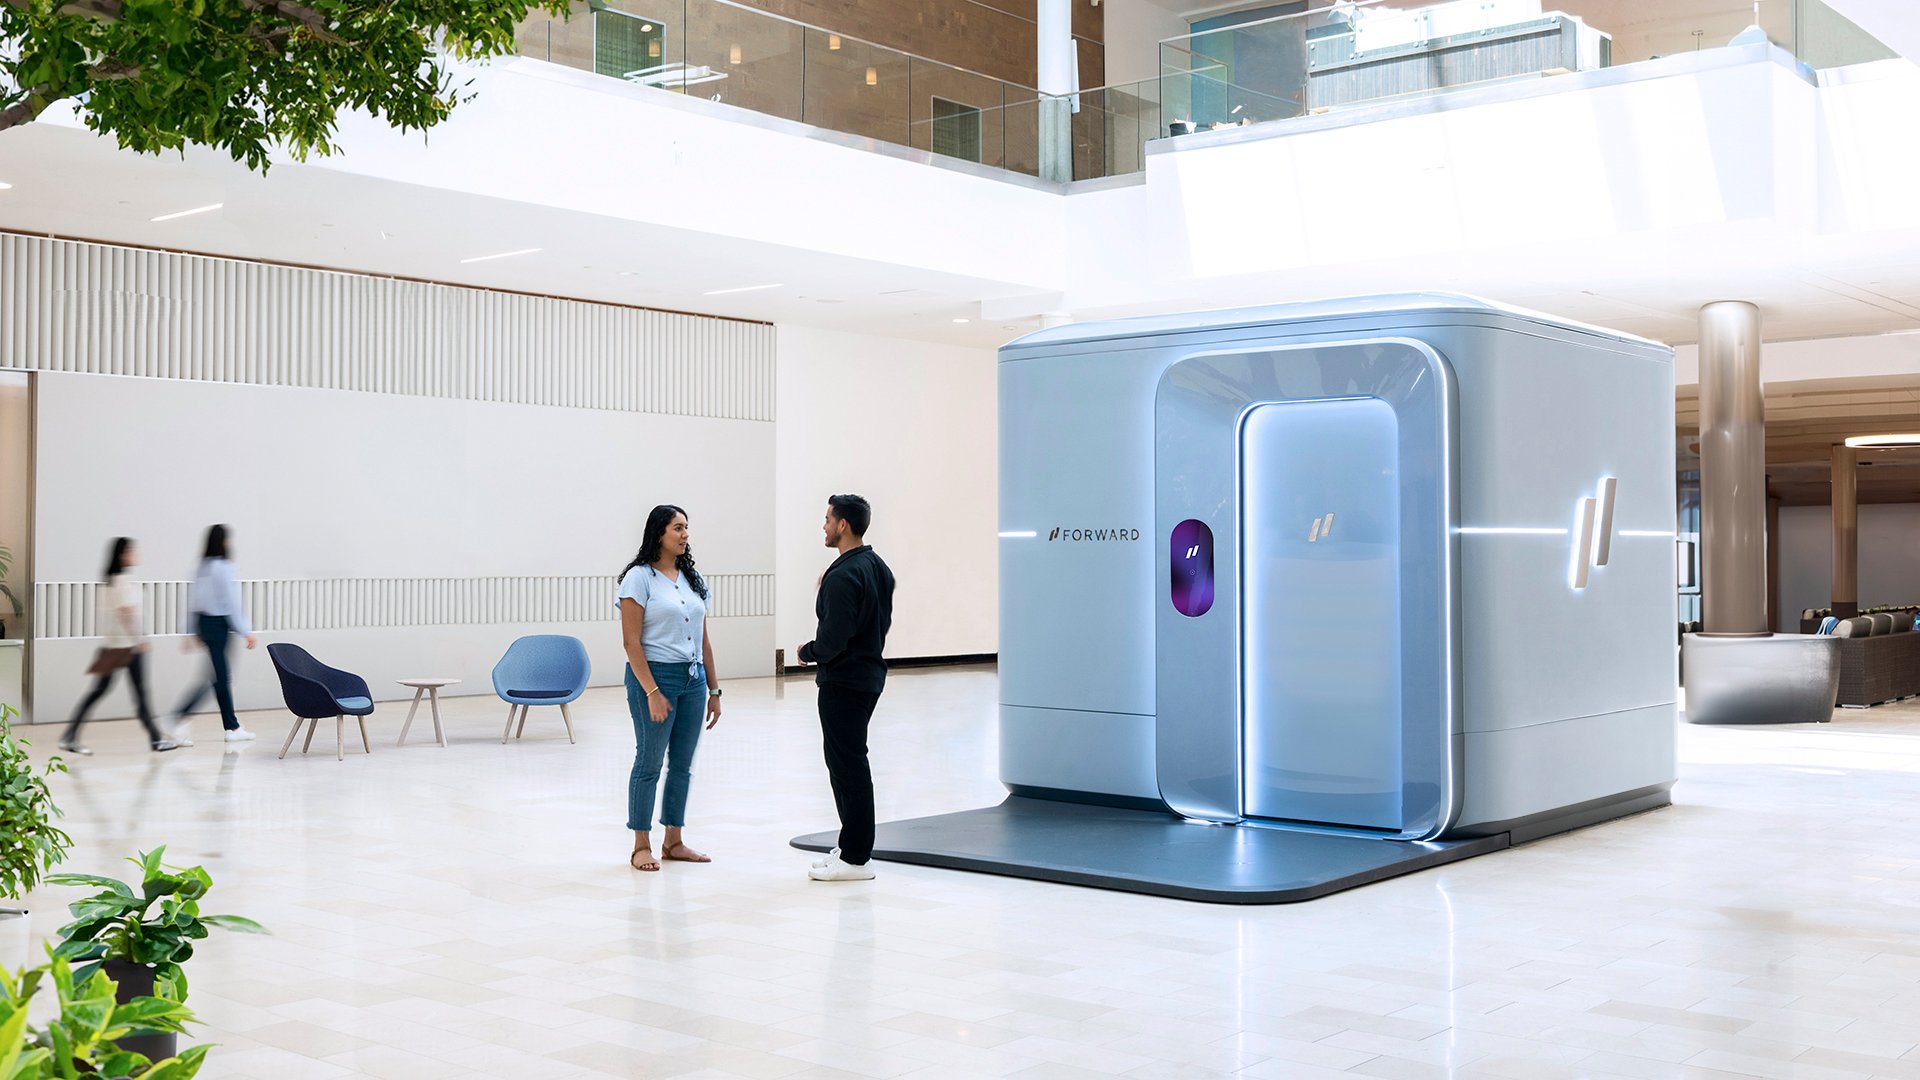 Primary care player Forward unveils AI-based, self-serve CarePods backed by $100M series E round